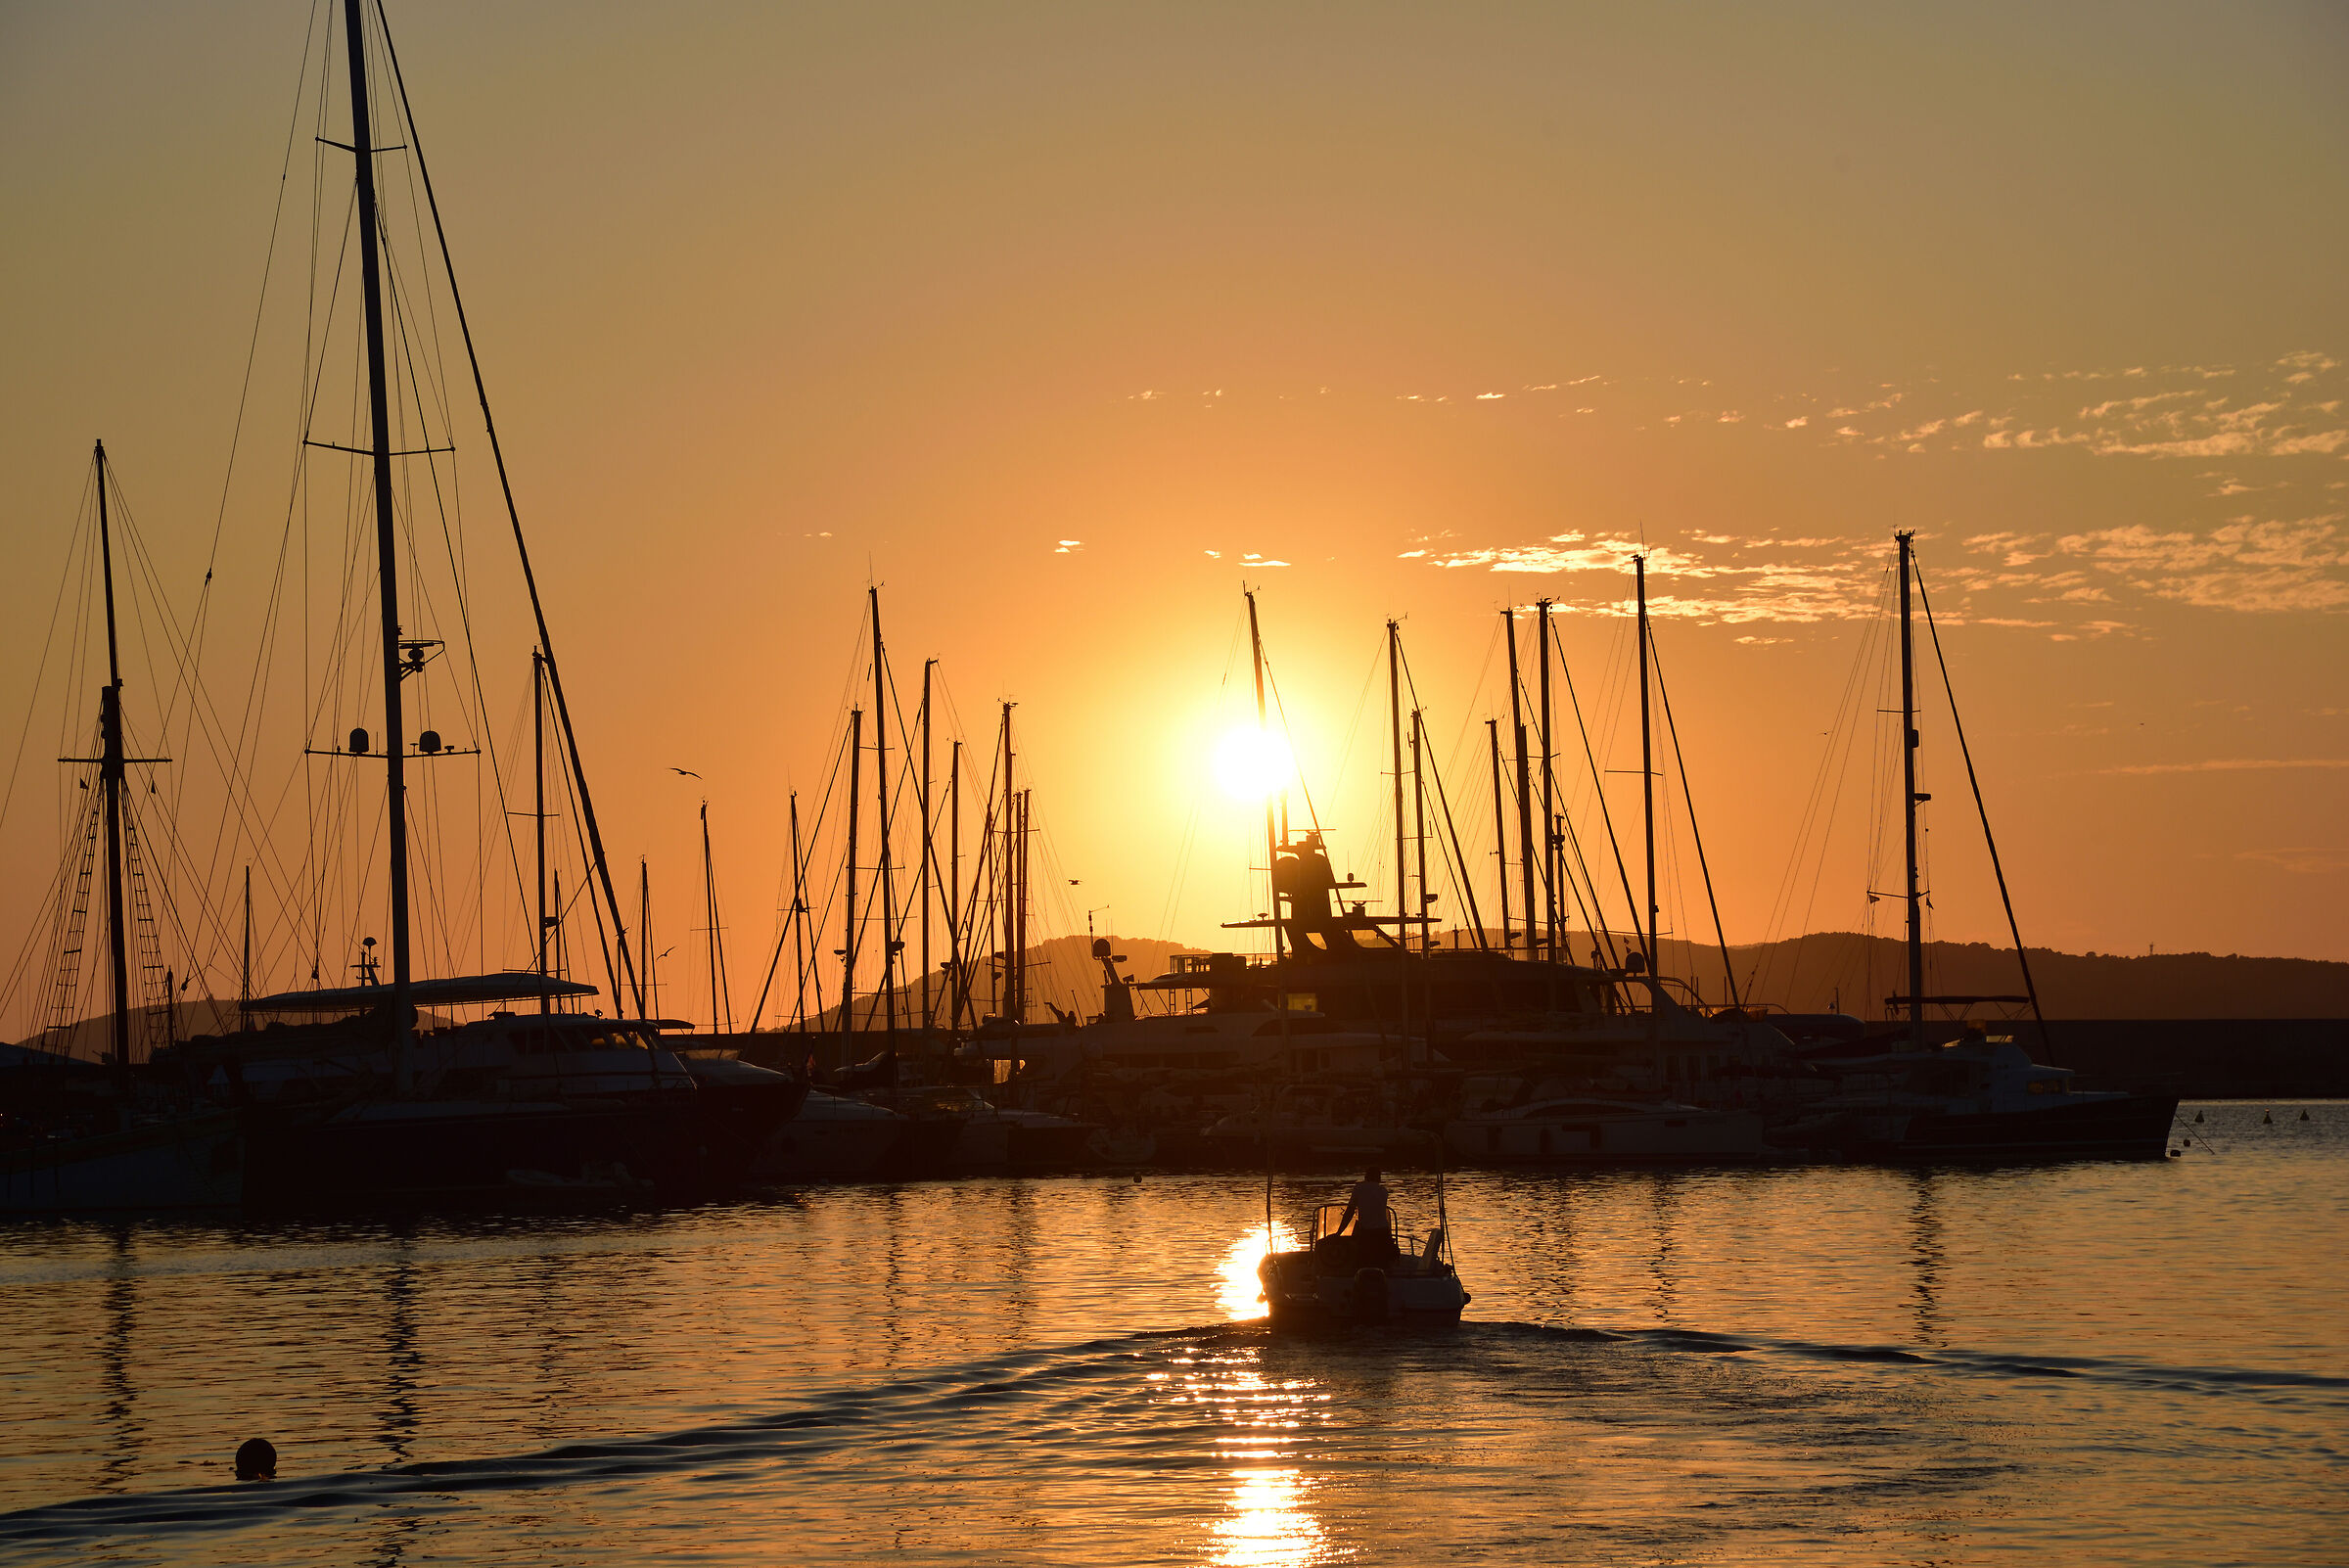 Sunset over the port of Alghero...